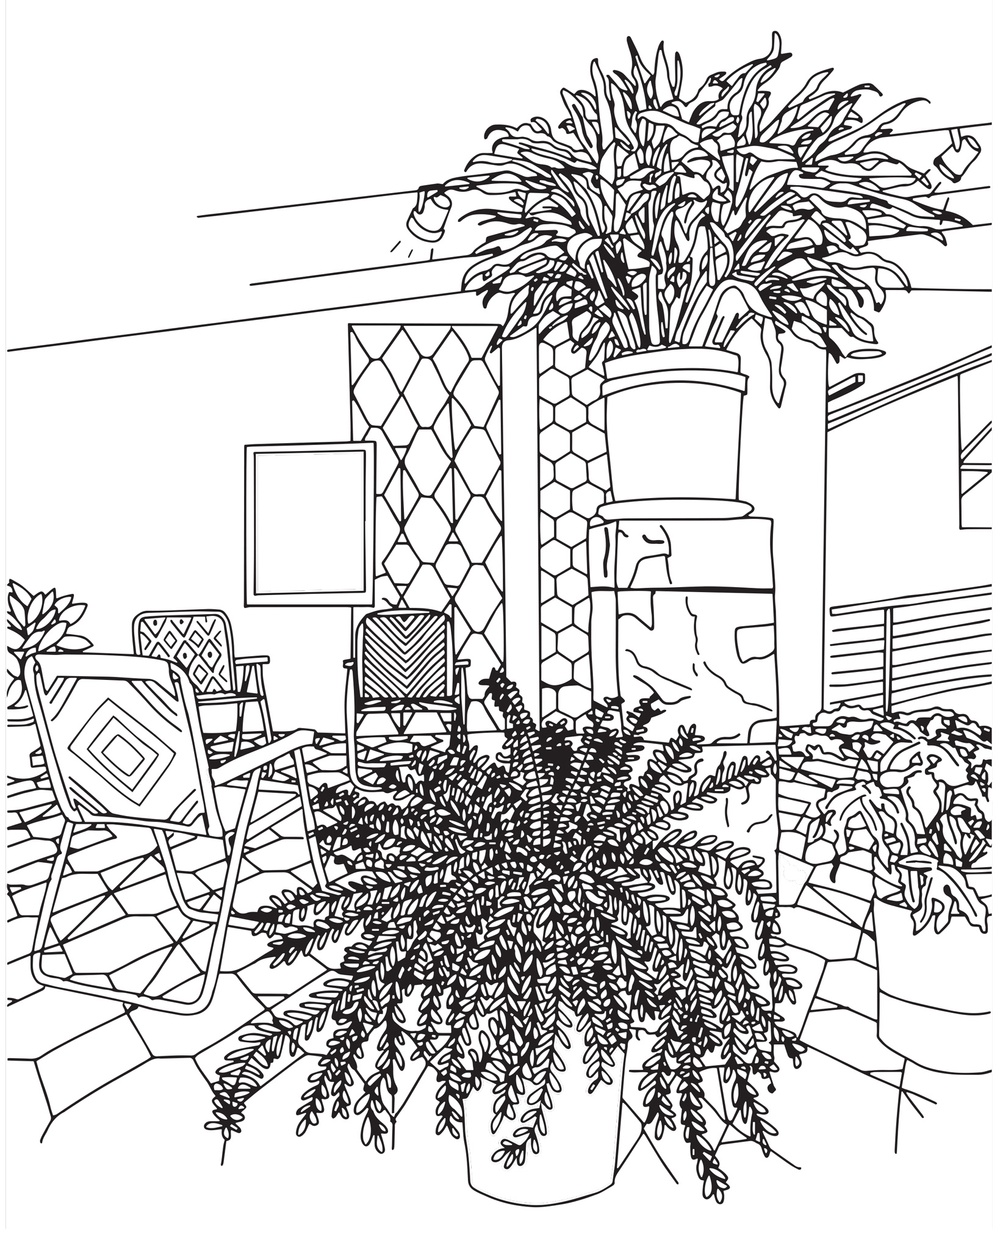 A black and white line drawing of a room full of chairs, art, and plants.